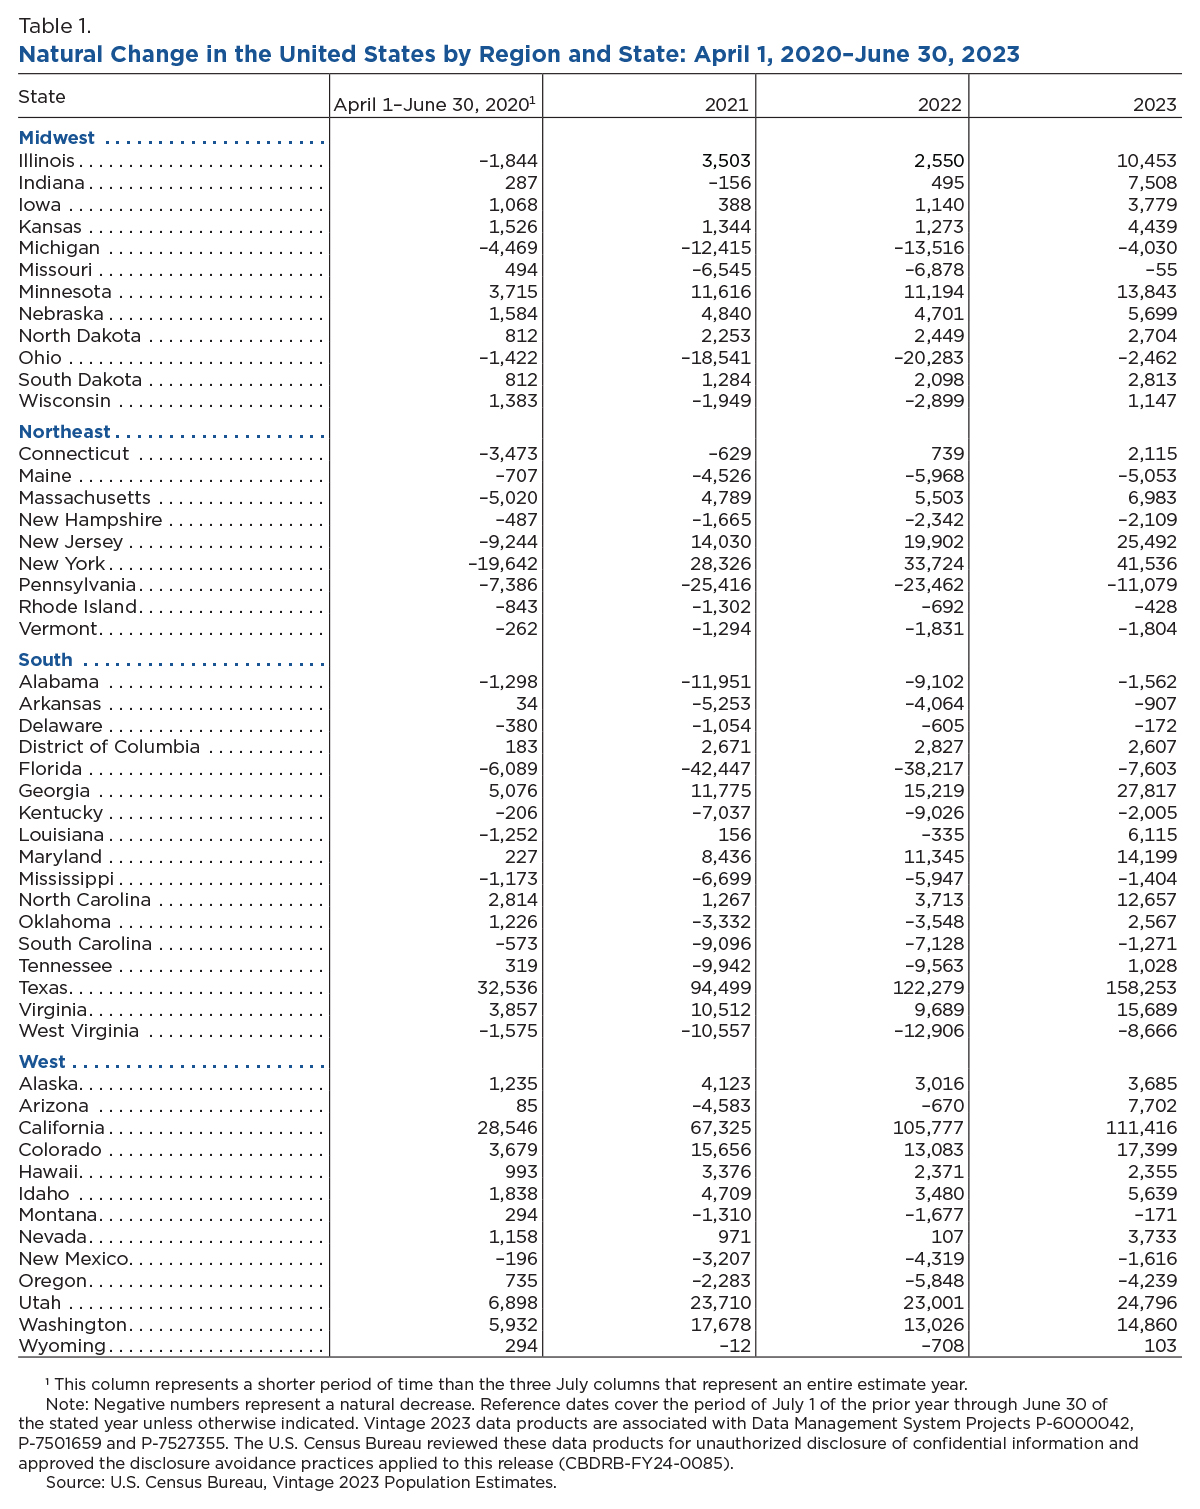 Table 1. Natural Change in the United States by Region and State: April 1, 2020-June 30, 2023